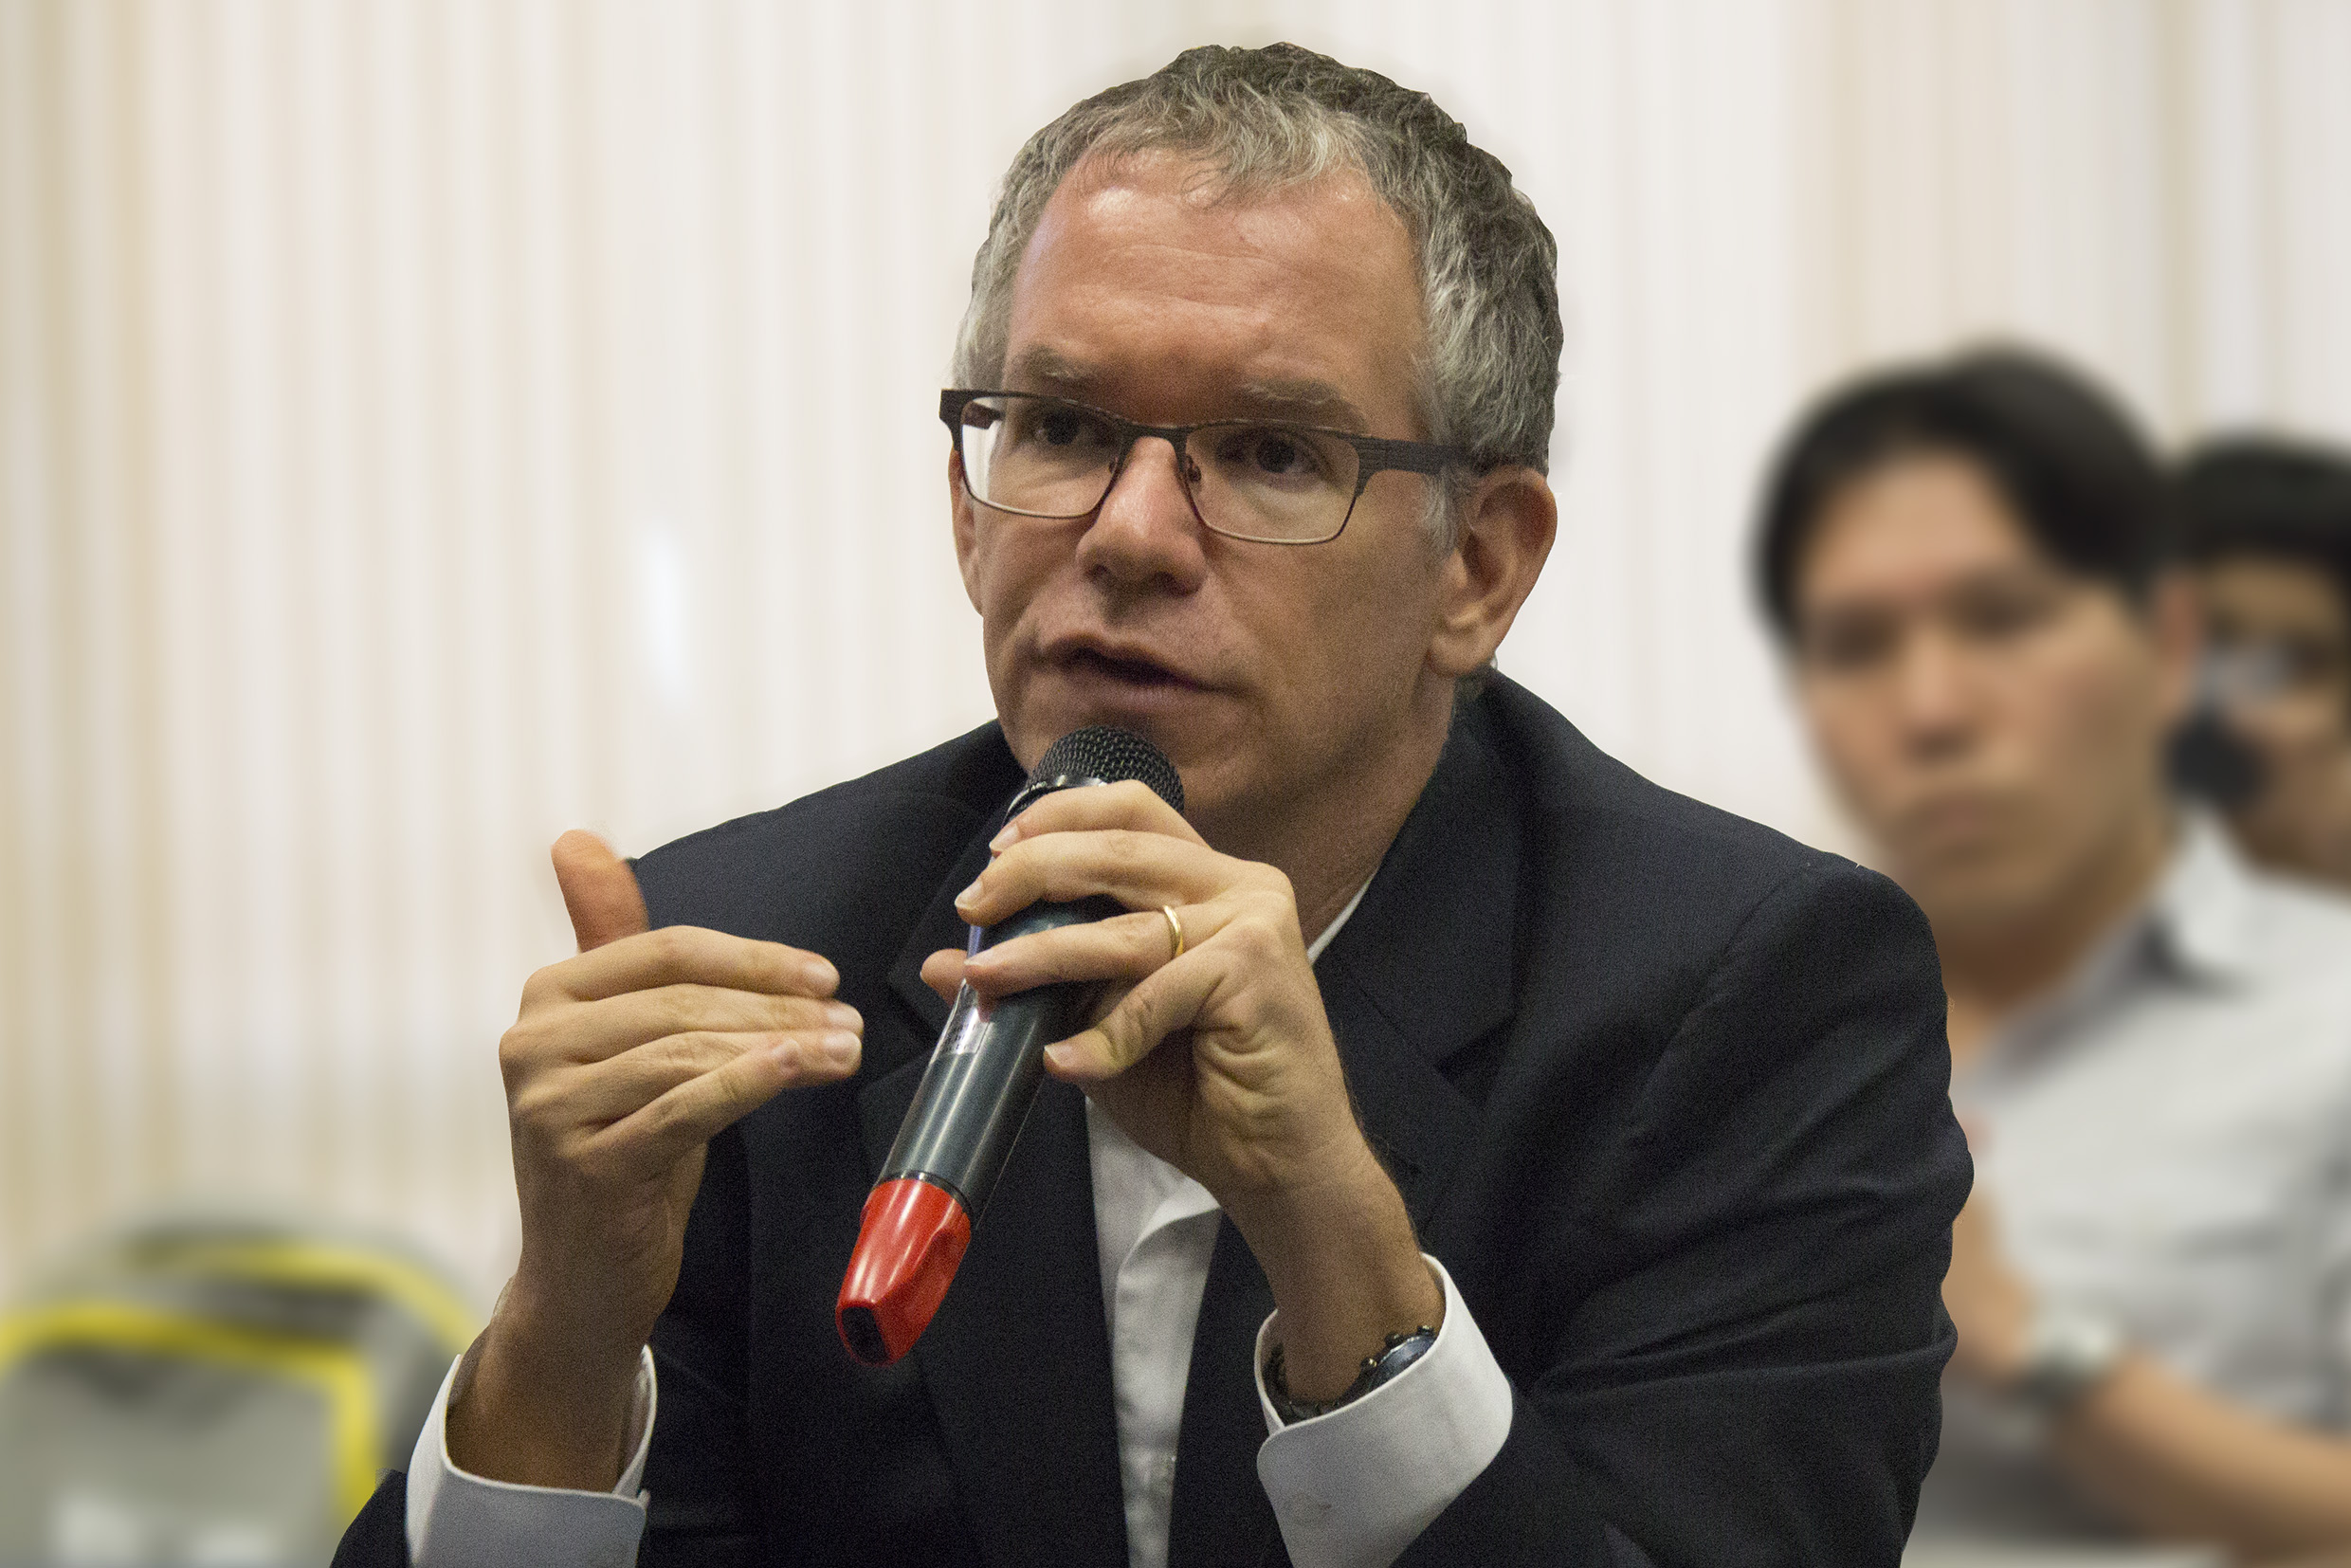 Marcelo Knobel, debater and rapporteur of "The Future of the Universities" - April 24, 2015